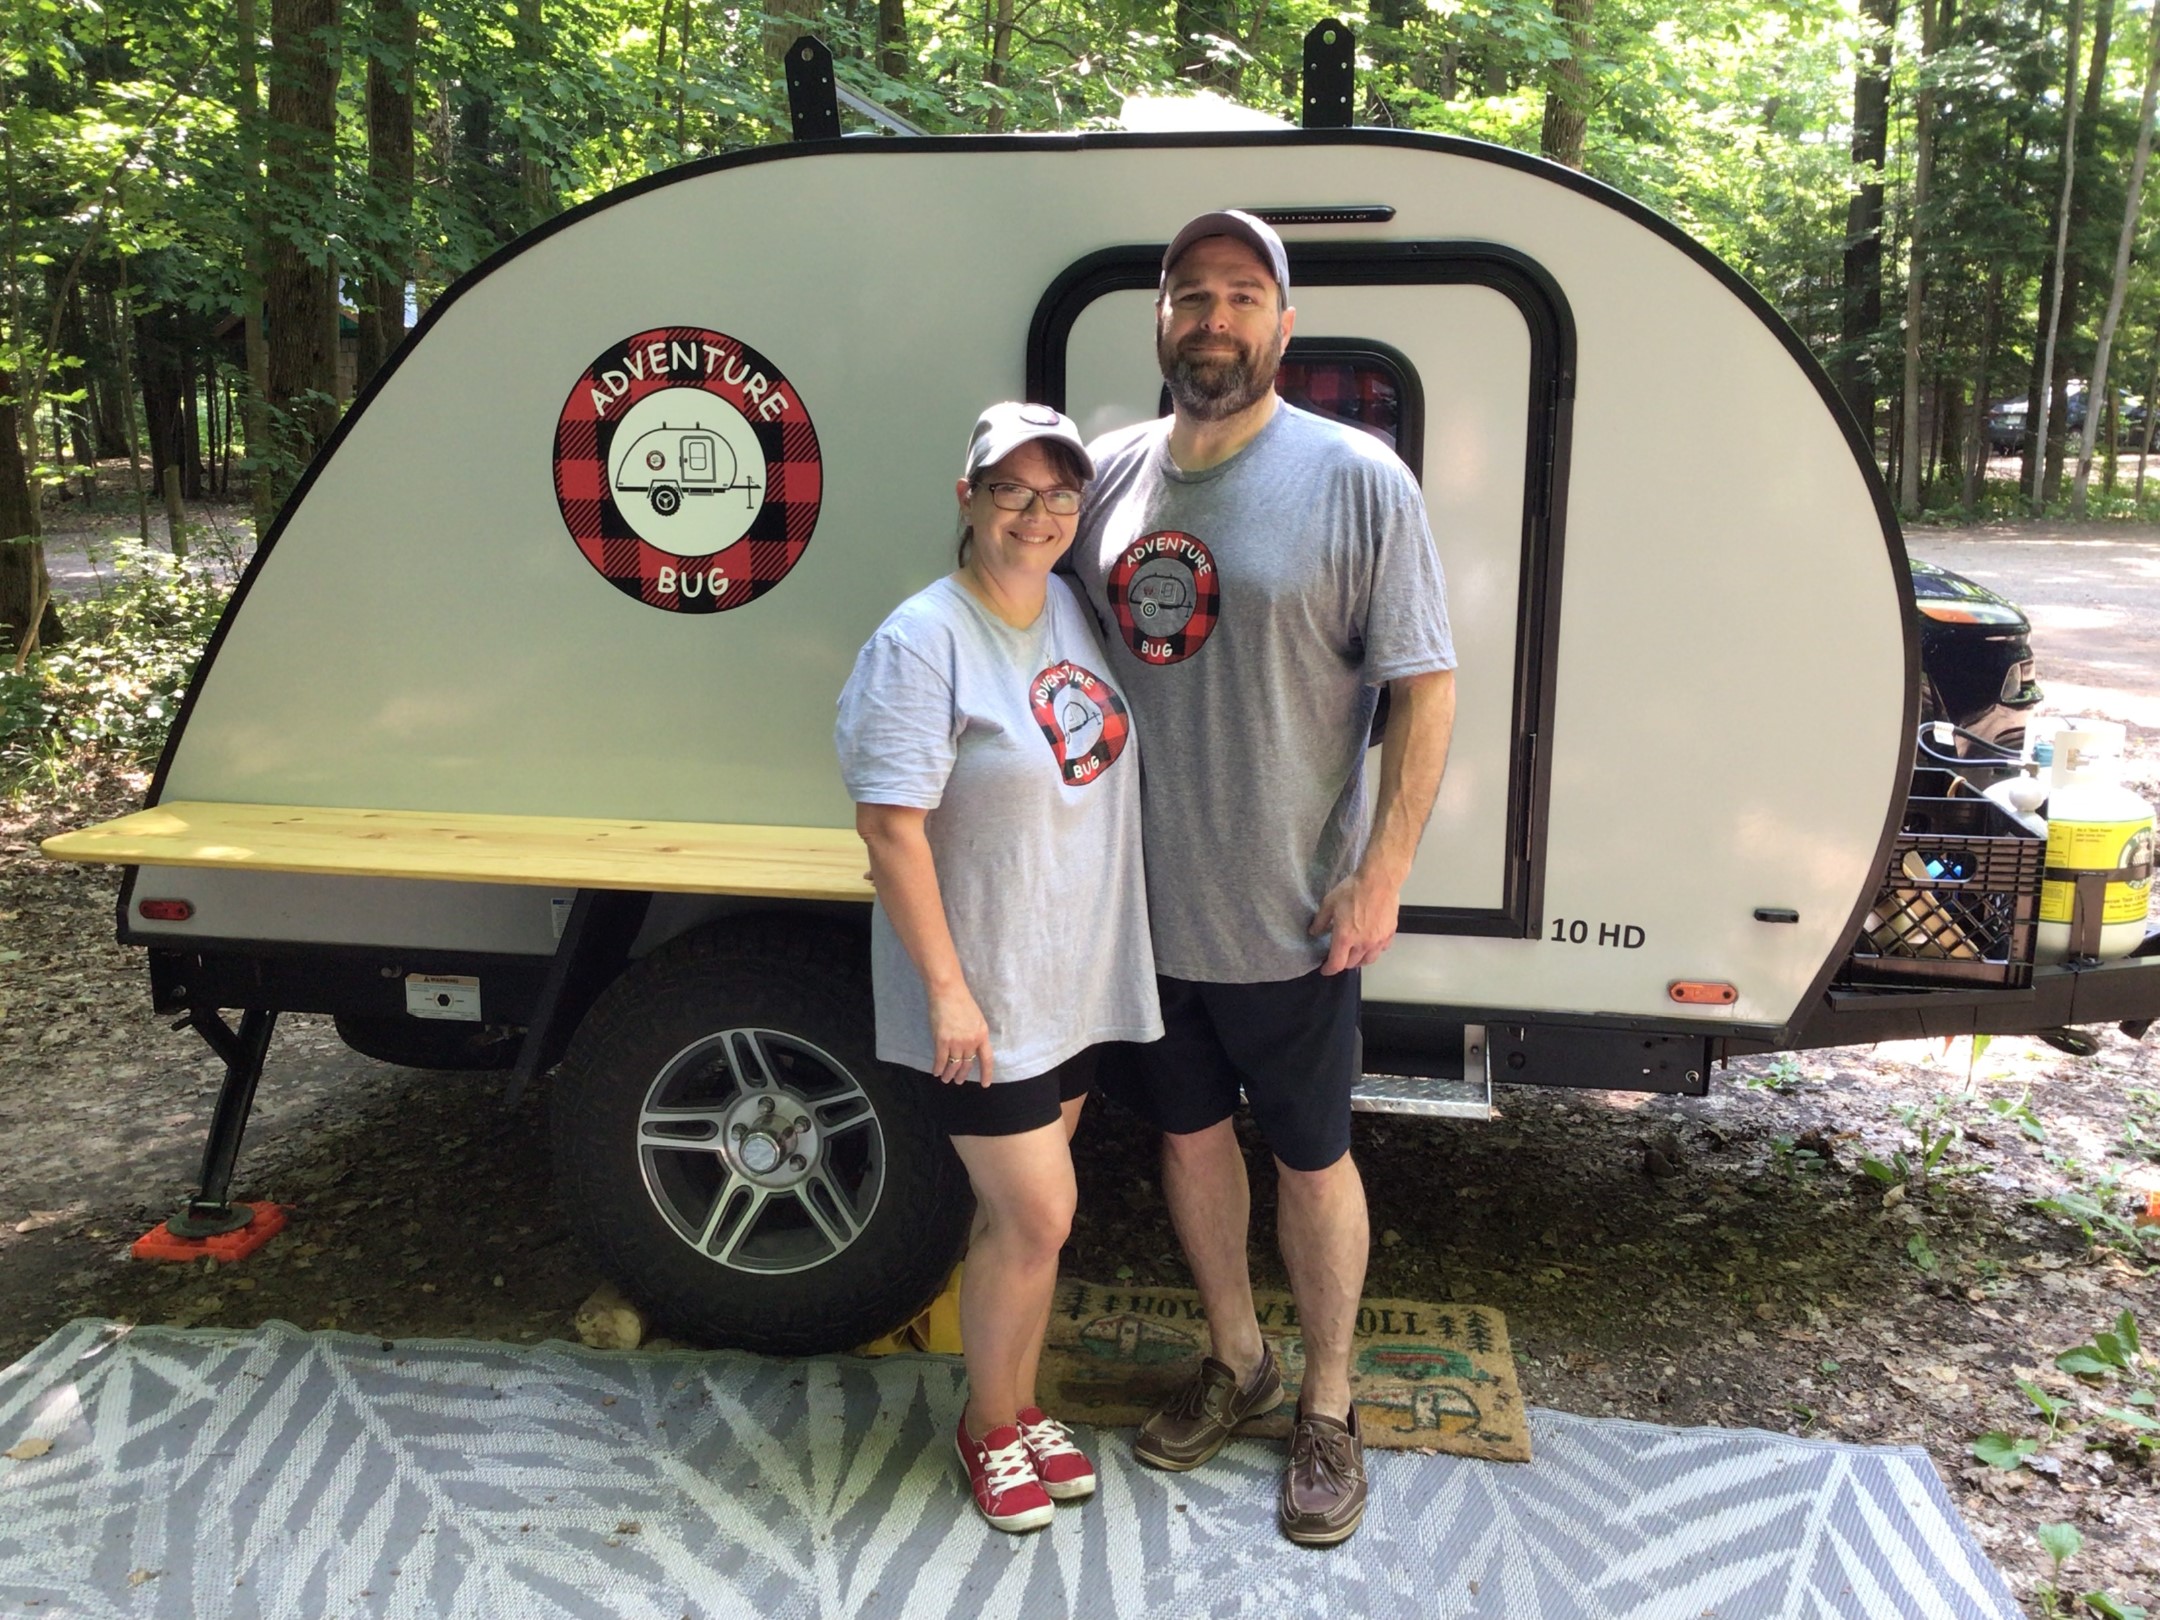 Brad and Jennifer Voisin applied some creative graphics and gear to refresh their teardrop trailer.